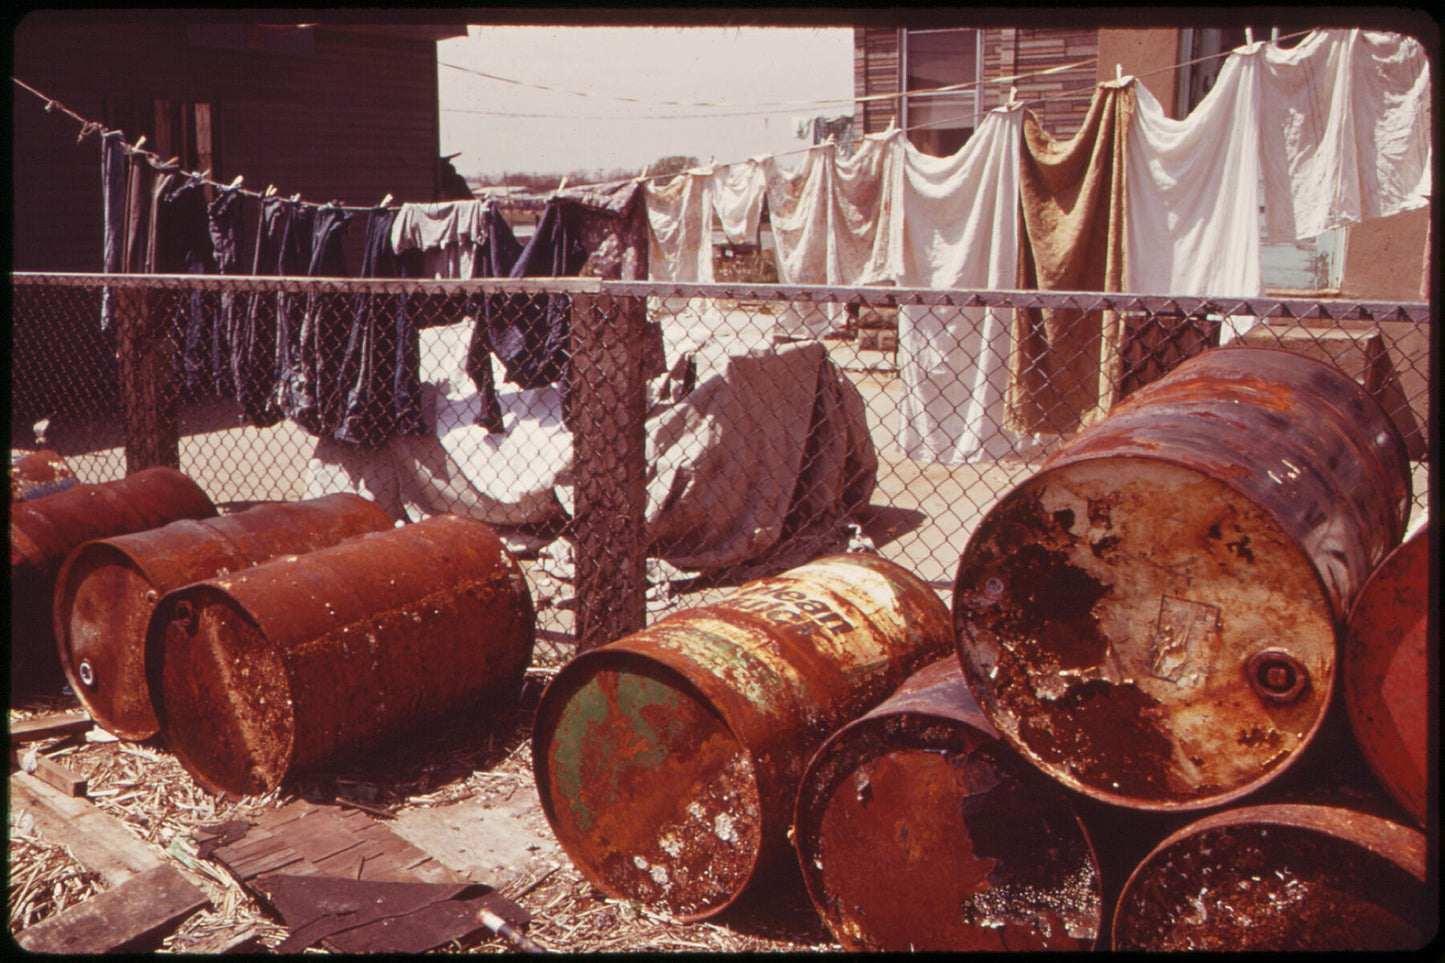 Rusty Oil Cans Pile Up near Home in Broad Channel, a Jamaica Bay Community by Arthur Tress - 1973